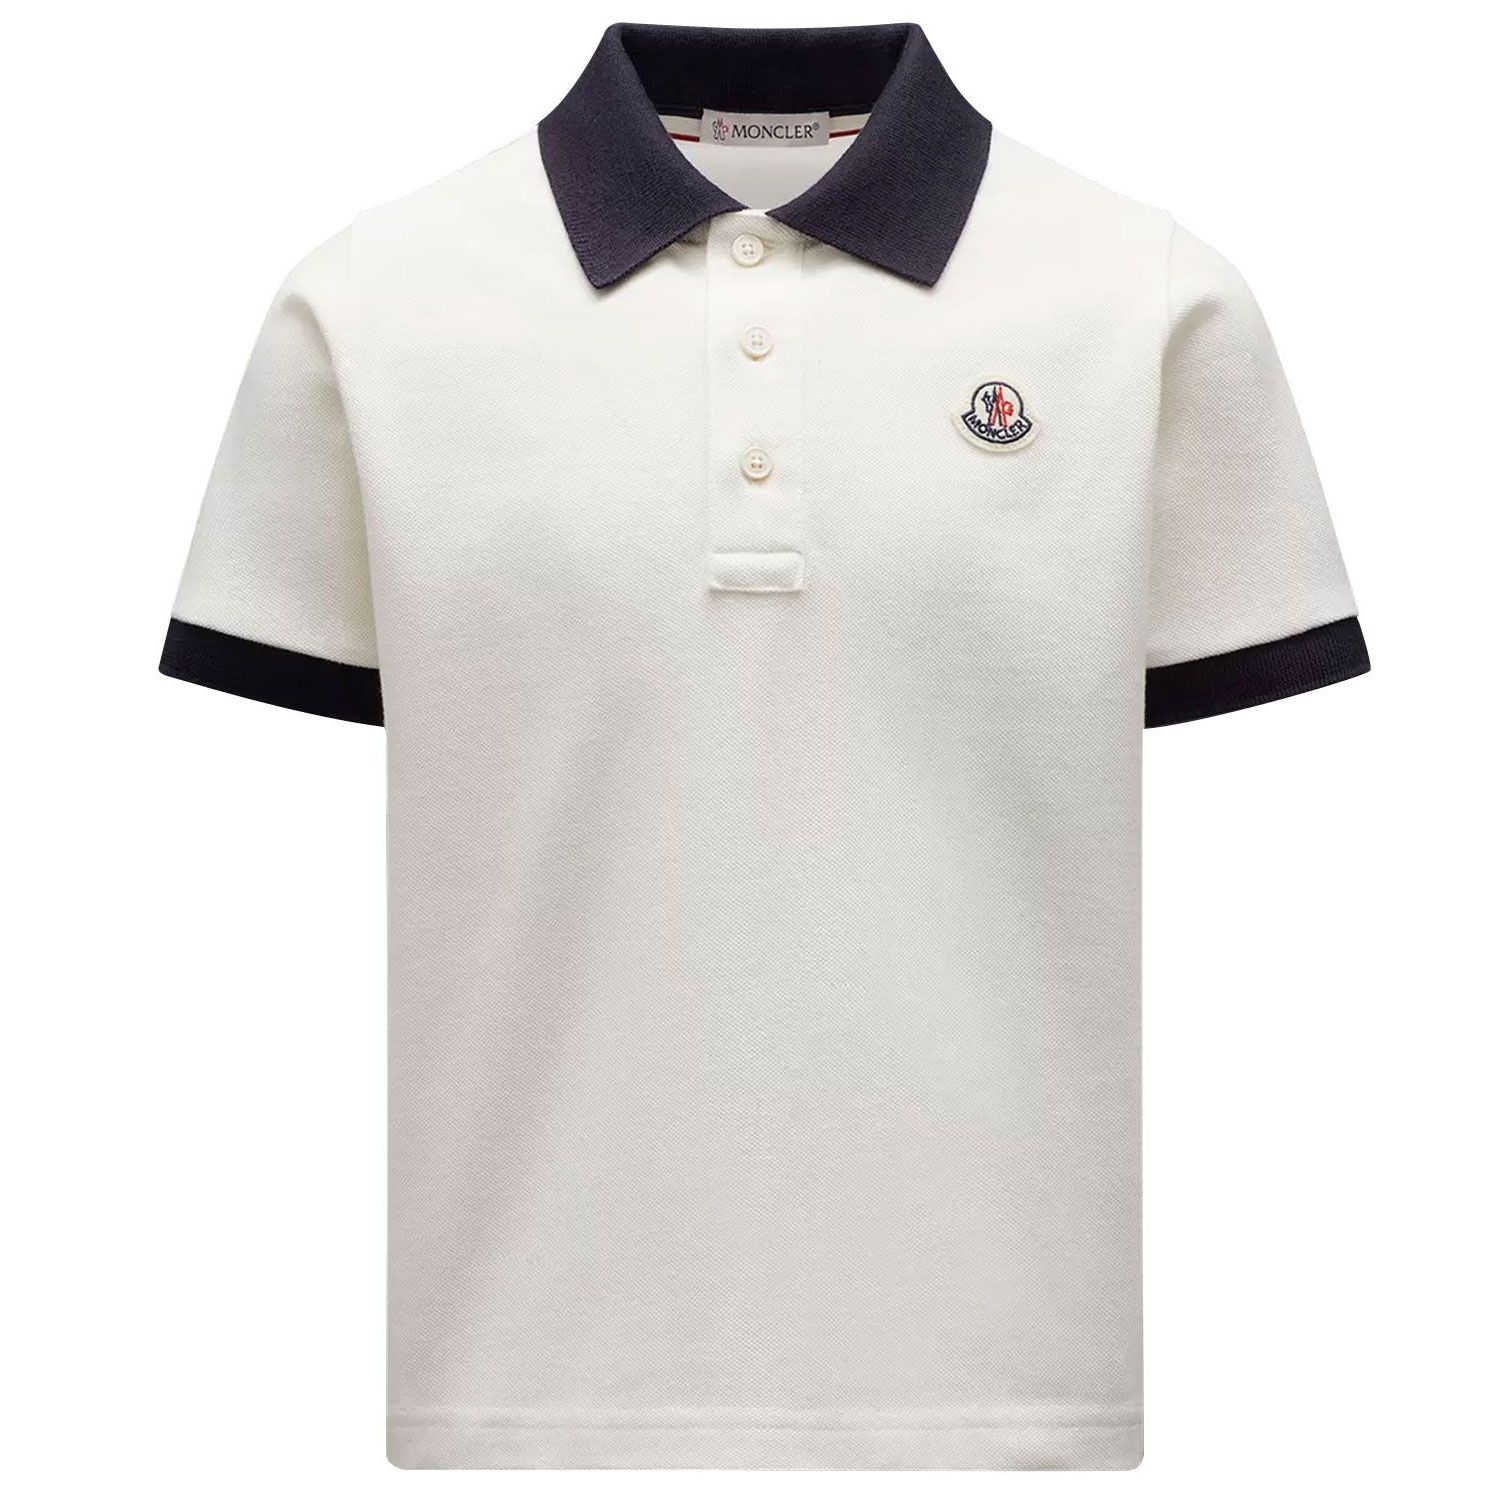 Afbeelding van Moncler H19548A000108496W kinder polo wit